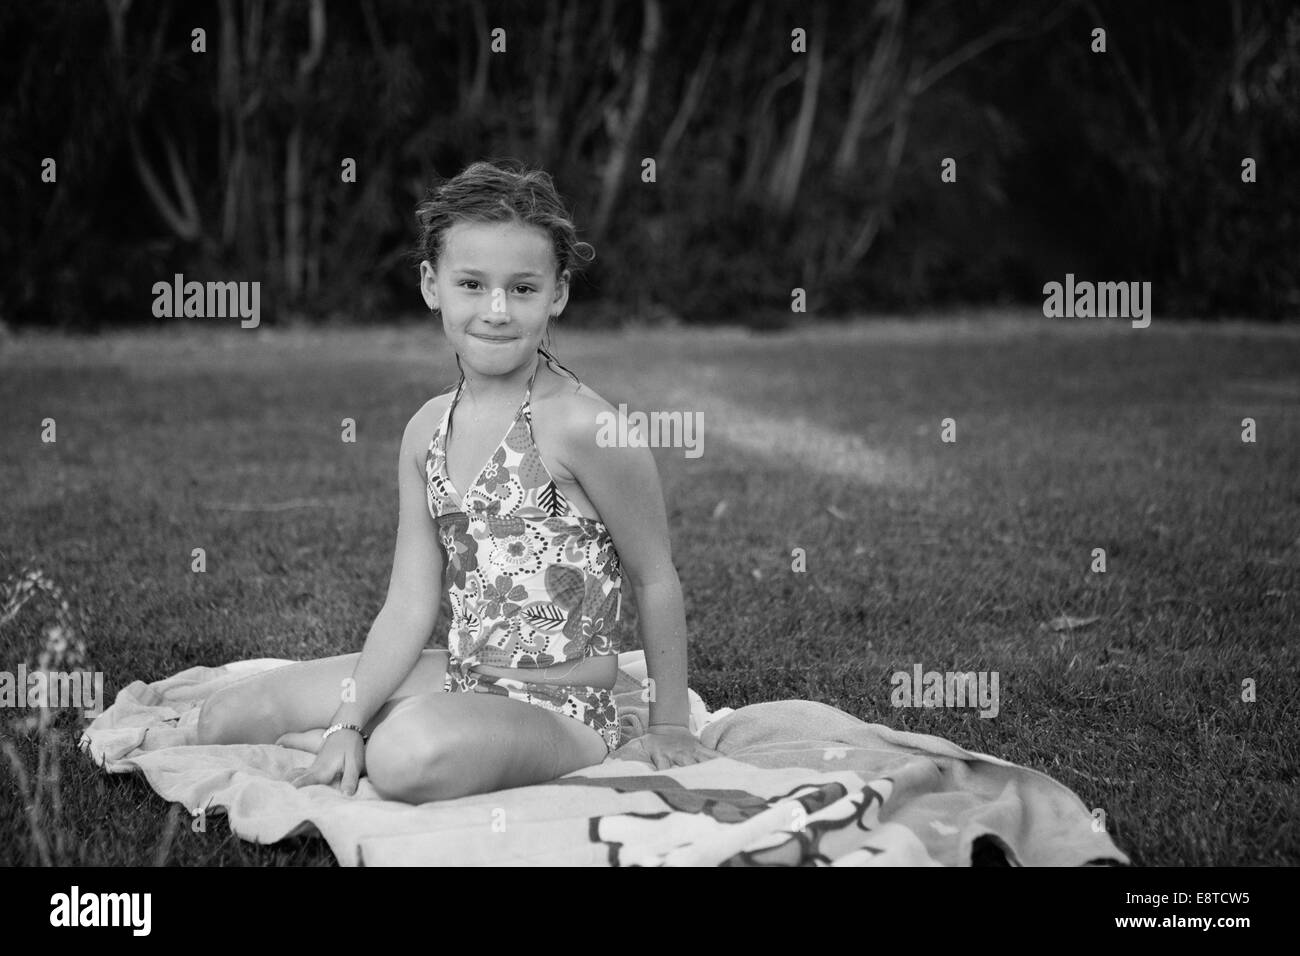 Caucasian girl sitting on towel in backyard Banque D'Images